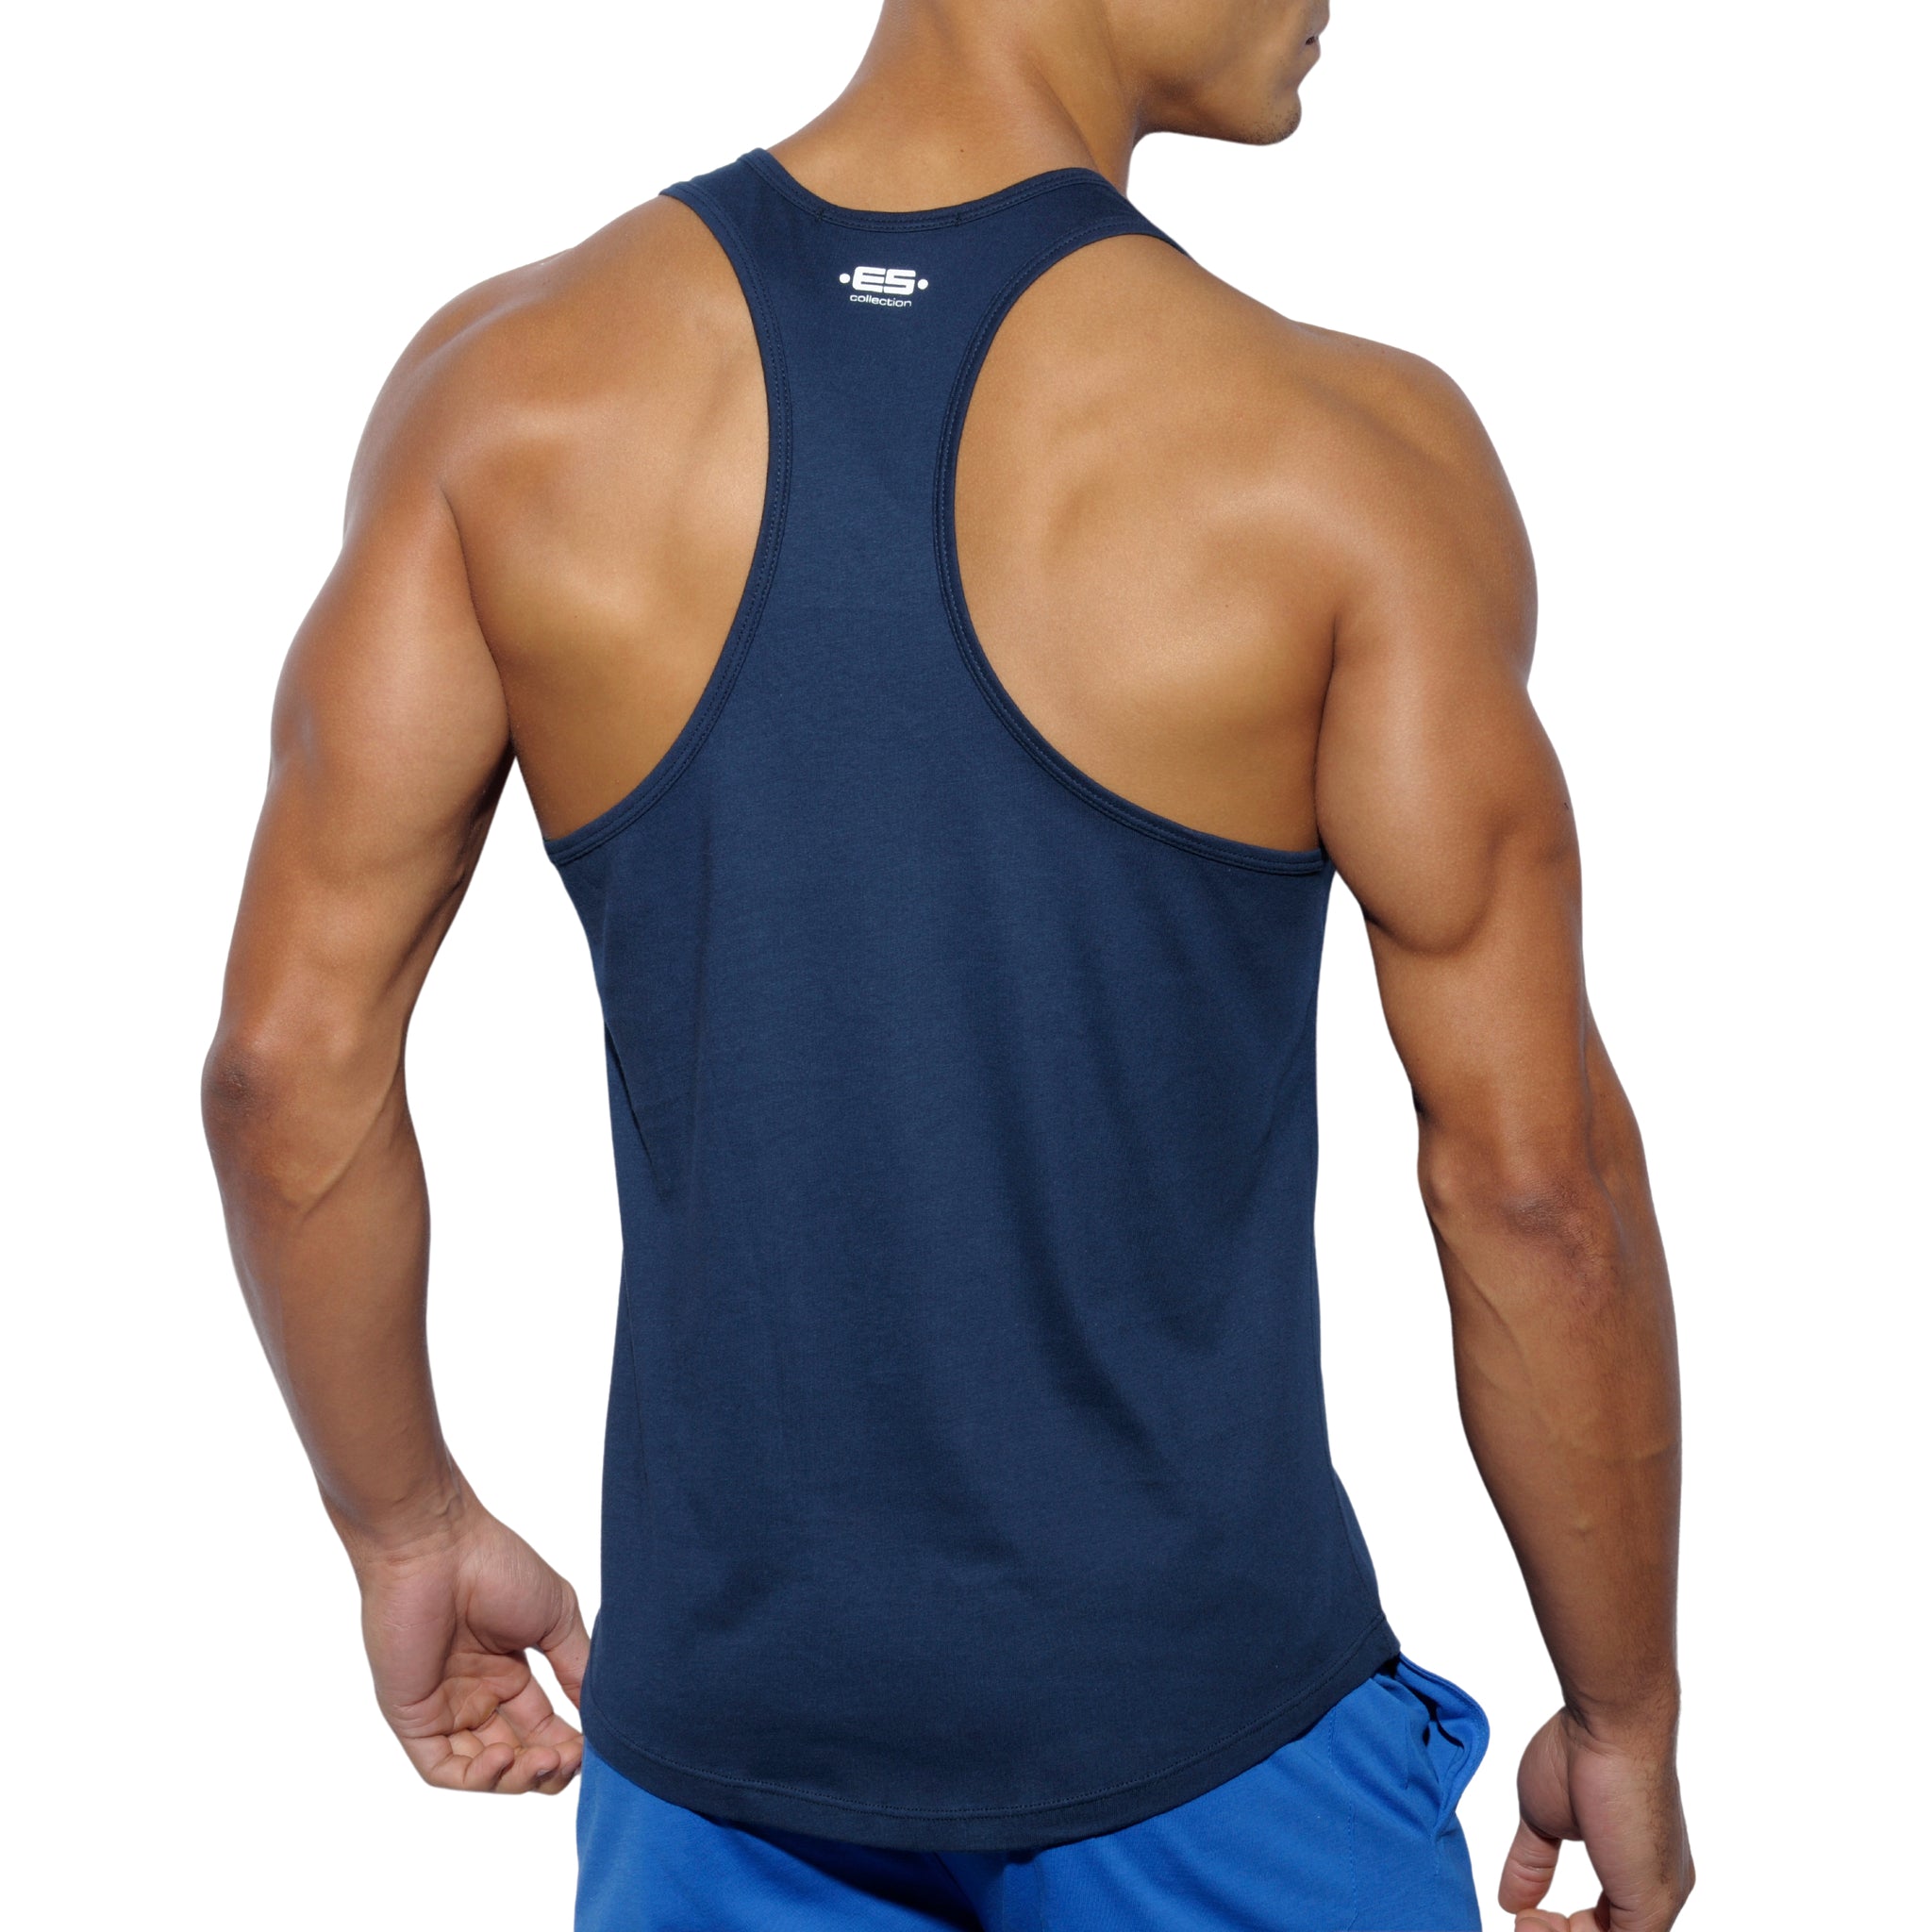 ES Collection Never Back Down Tank Top Navy TS169